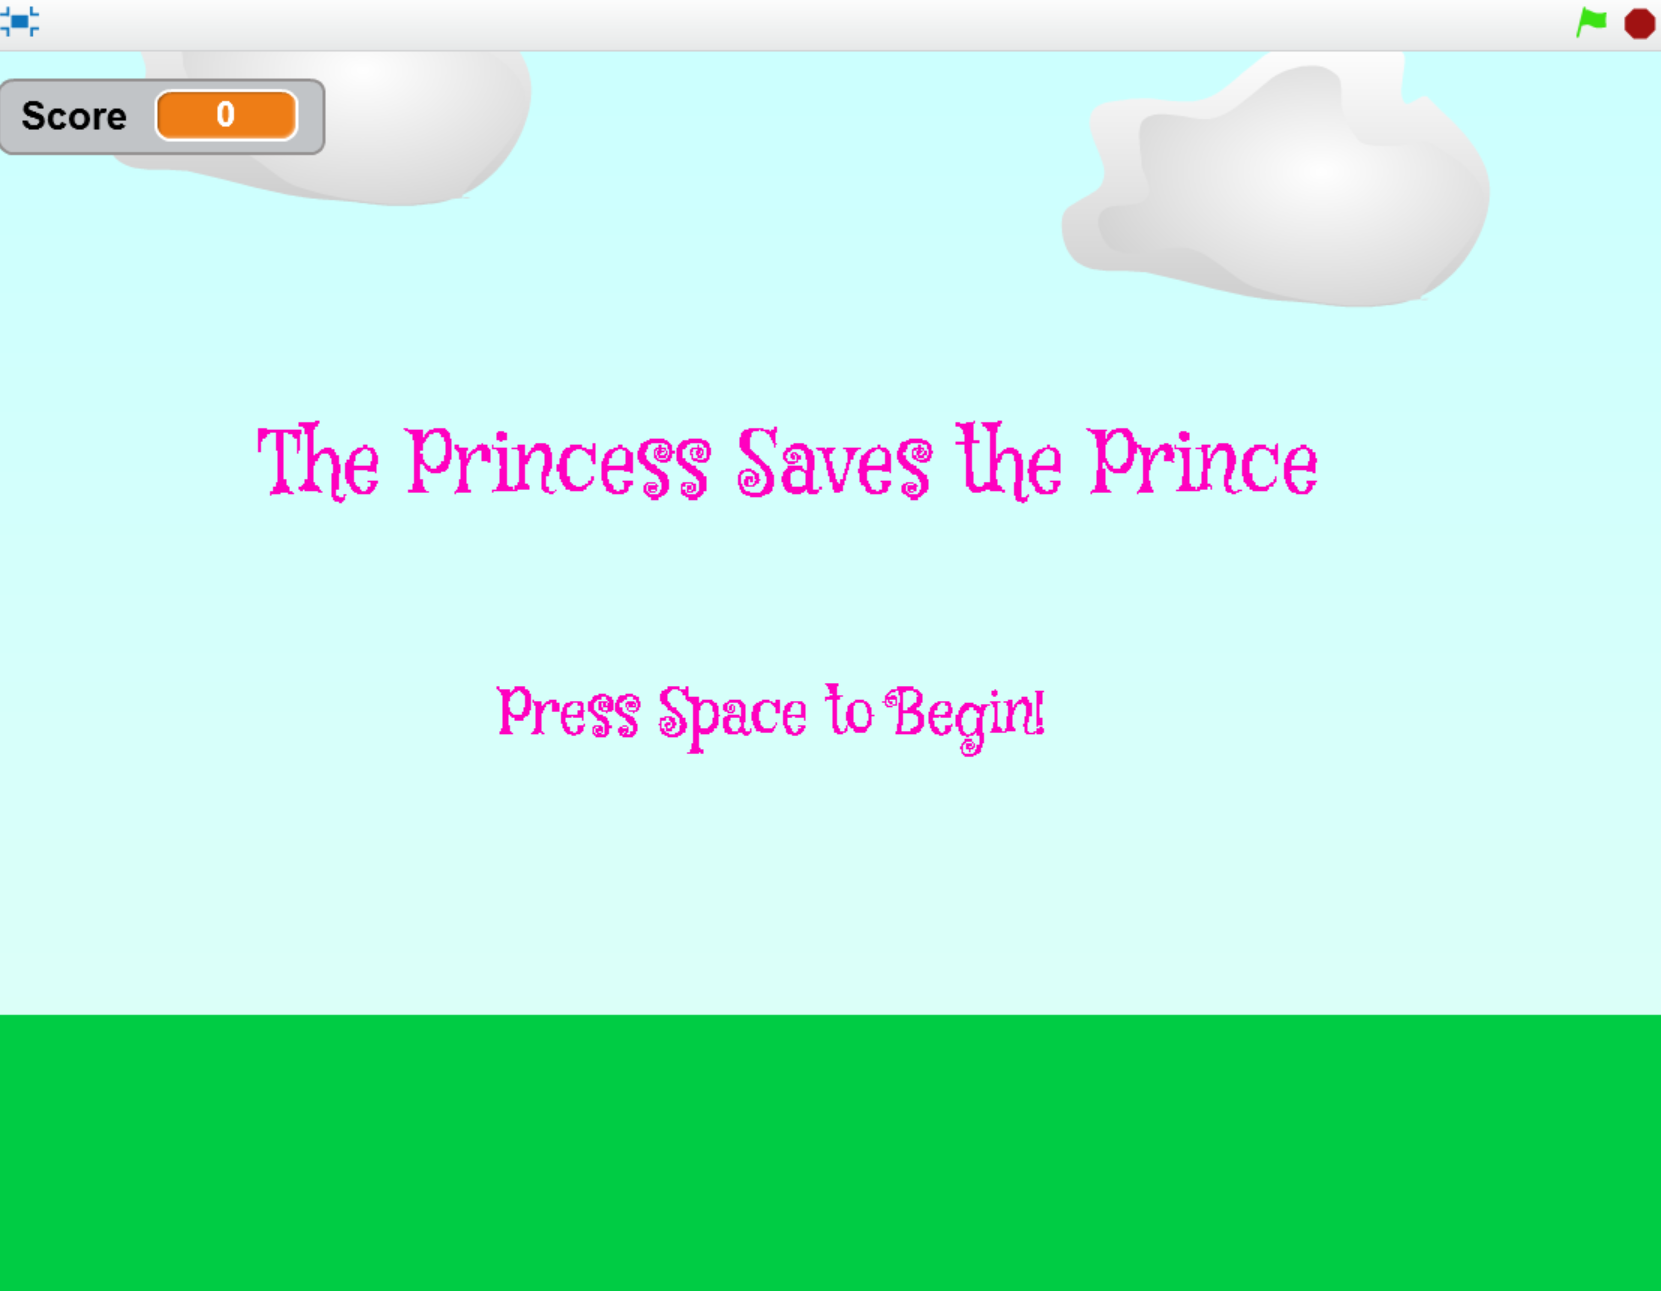 screenshot of title screen of game called 'The Princess Saves the Prince'